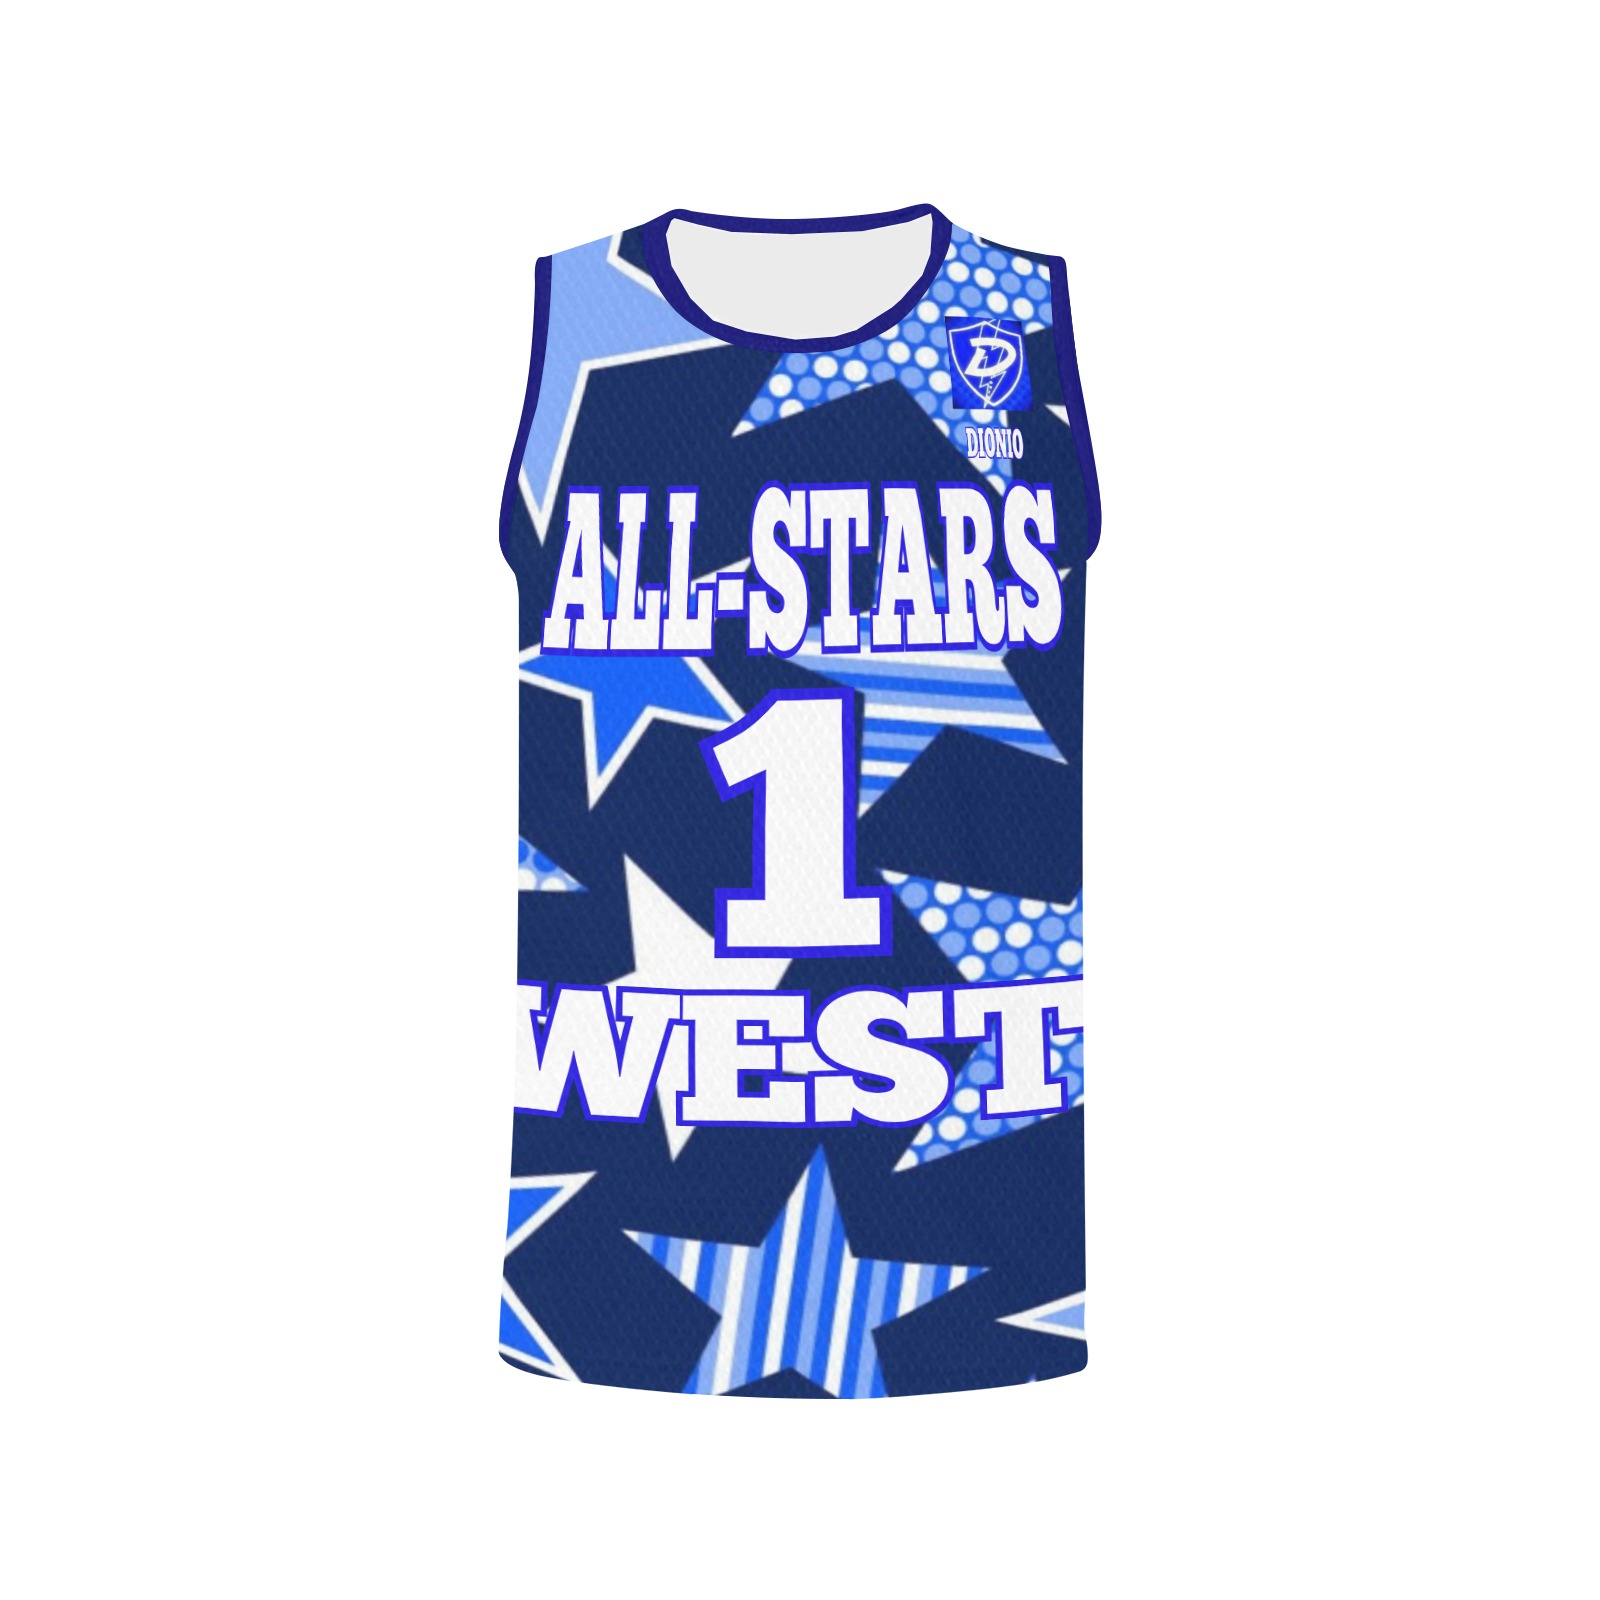 DIONIO Clothing - Men's Basketball All-Star Jersey (West Classic) All Over Print Basketball Jersey